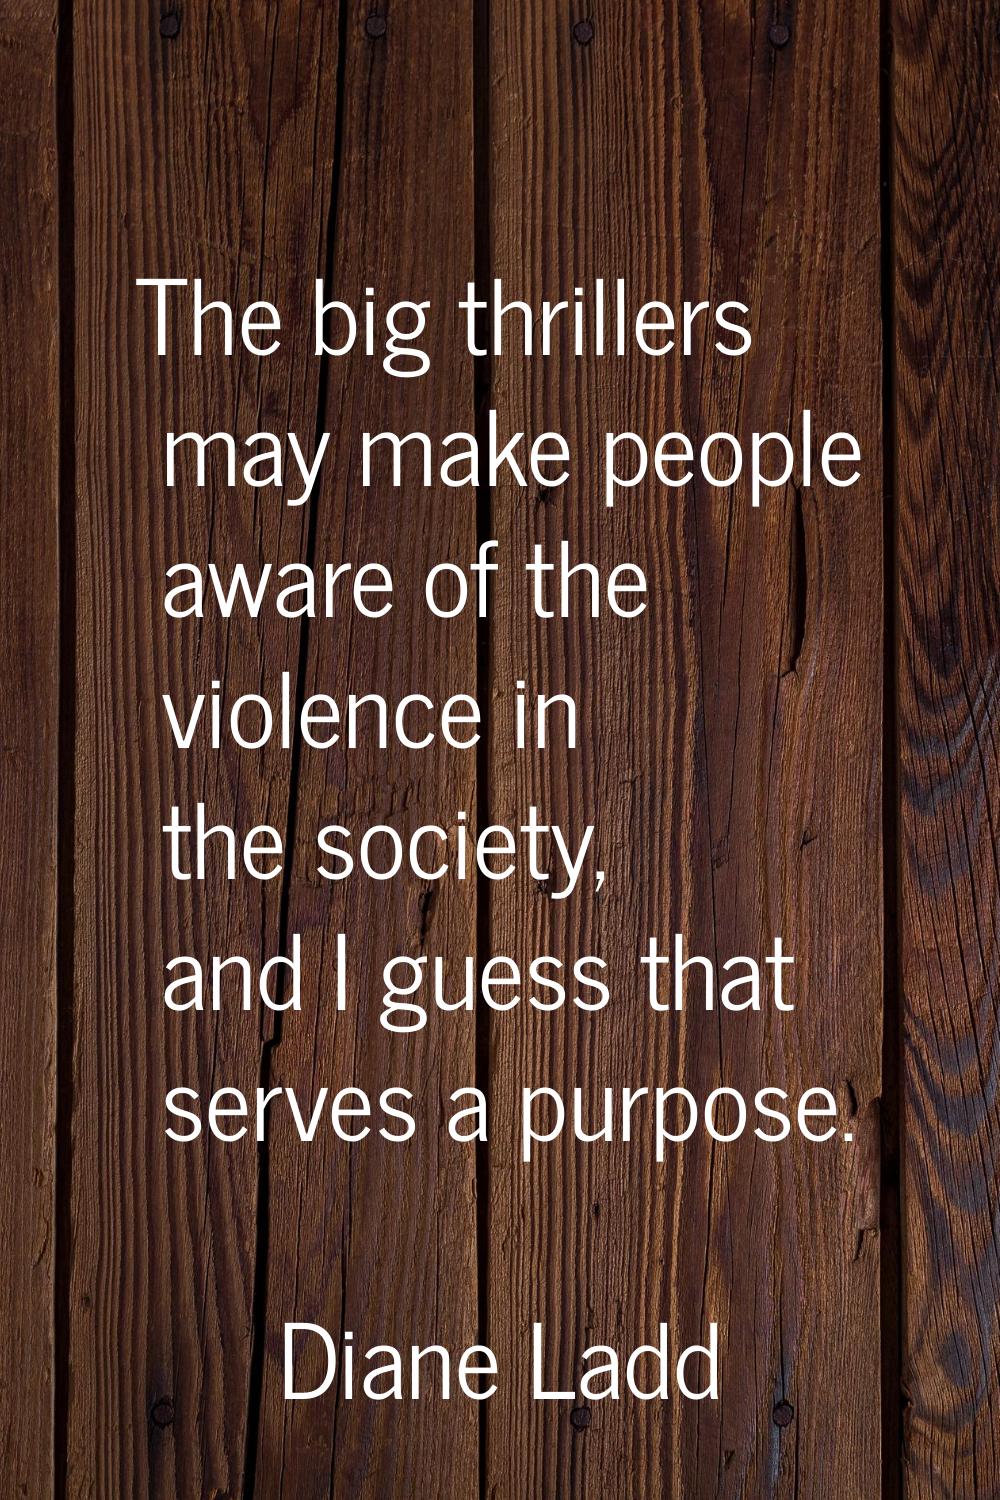 The big thrillers may make people aware of the violence in the society, and I guess that serves a p